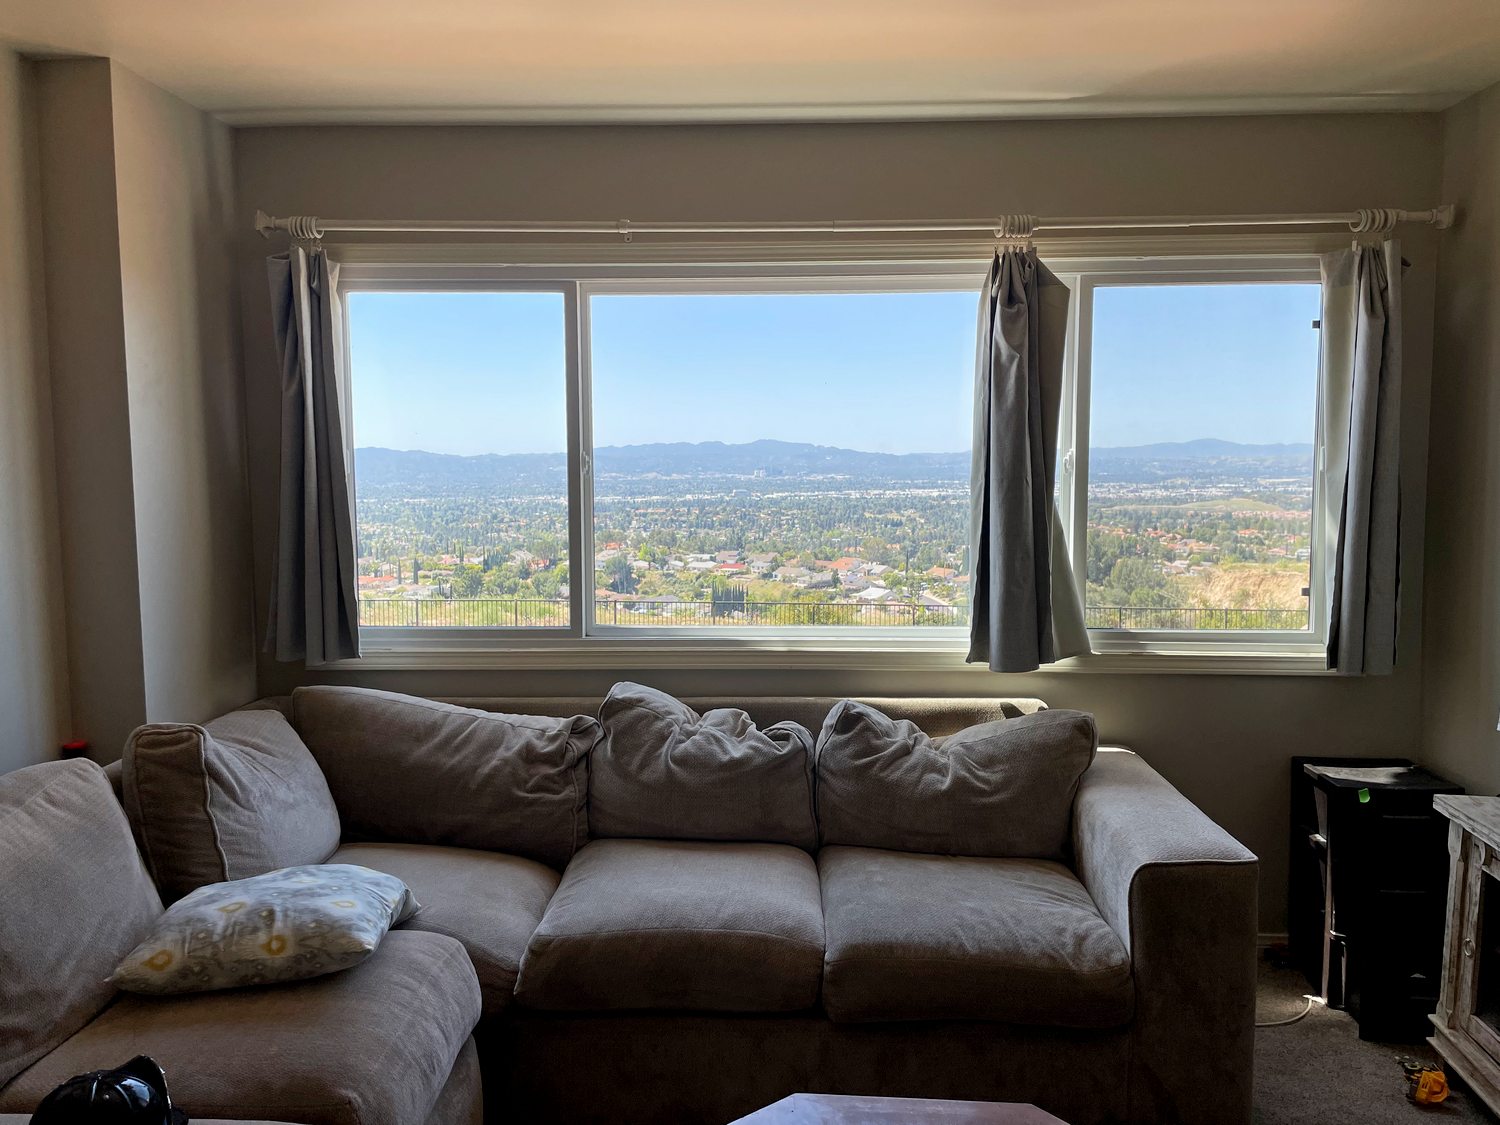 Window replacement in Porter Ranch, CA (2)